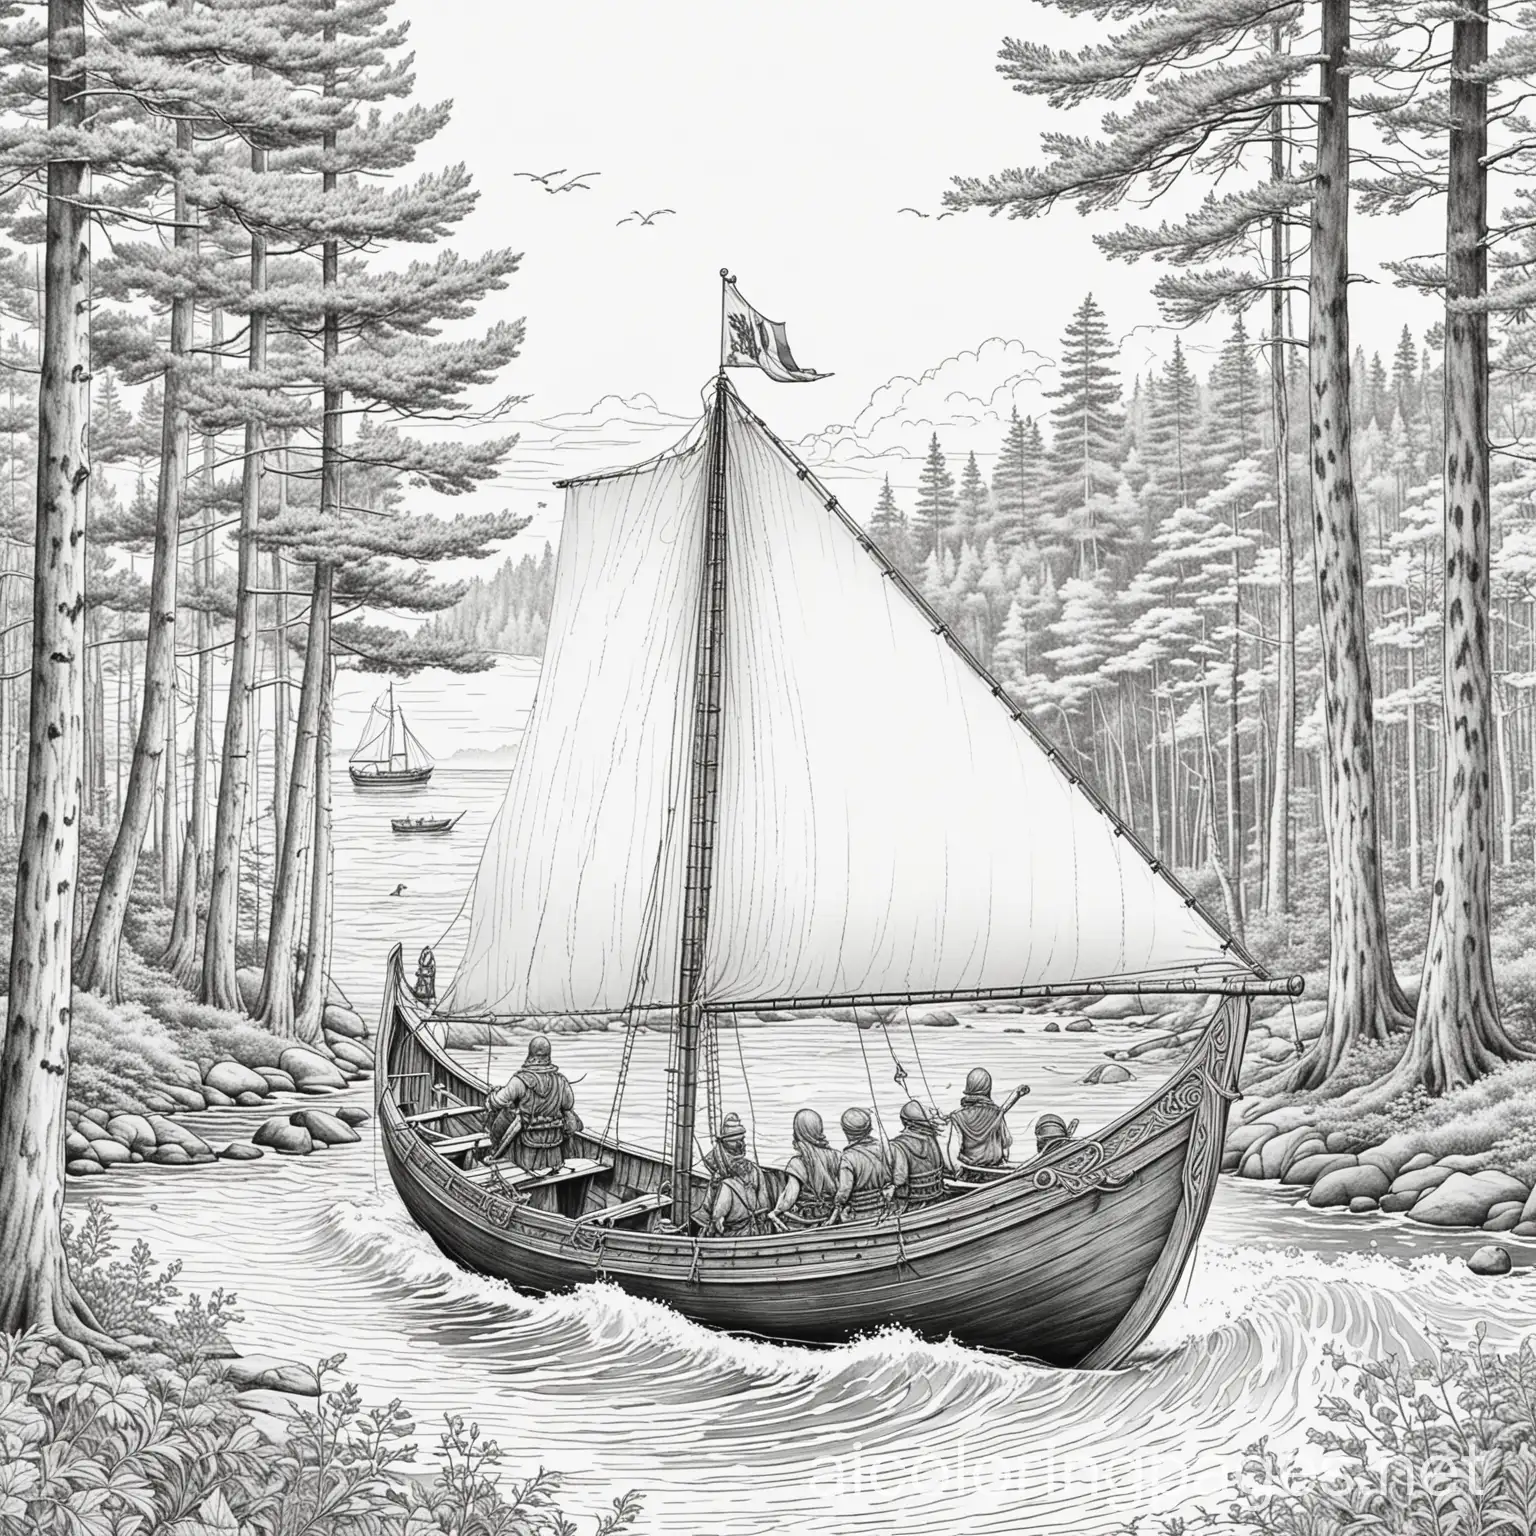 a viking boat off the coast of New England, tall pine trees, ocean, coloring page, black and white line, line art, Coloring Page, black and white, line art, white background, Simplicity, Ample White Space. The background of the coloring page is plain white to make it easy for young children to color within the lines. The outlines of all the subjects are easy to distinguish, making it simple for kids to color without too much difficulty